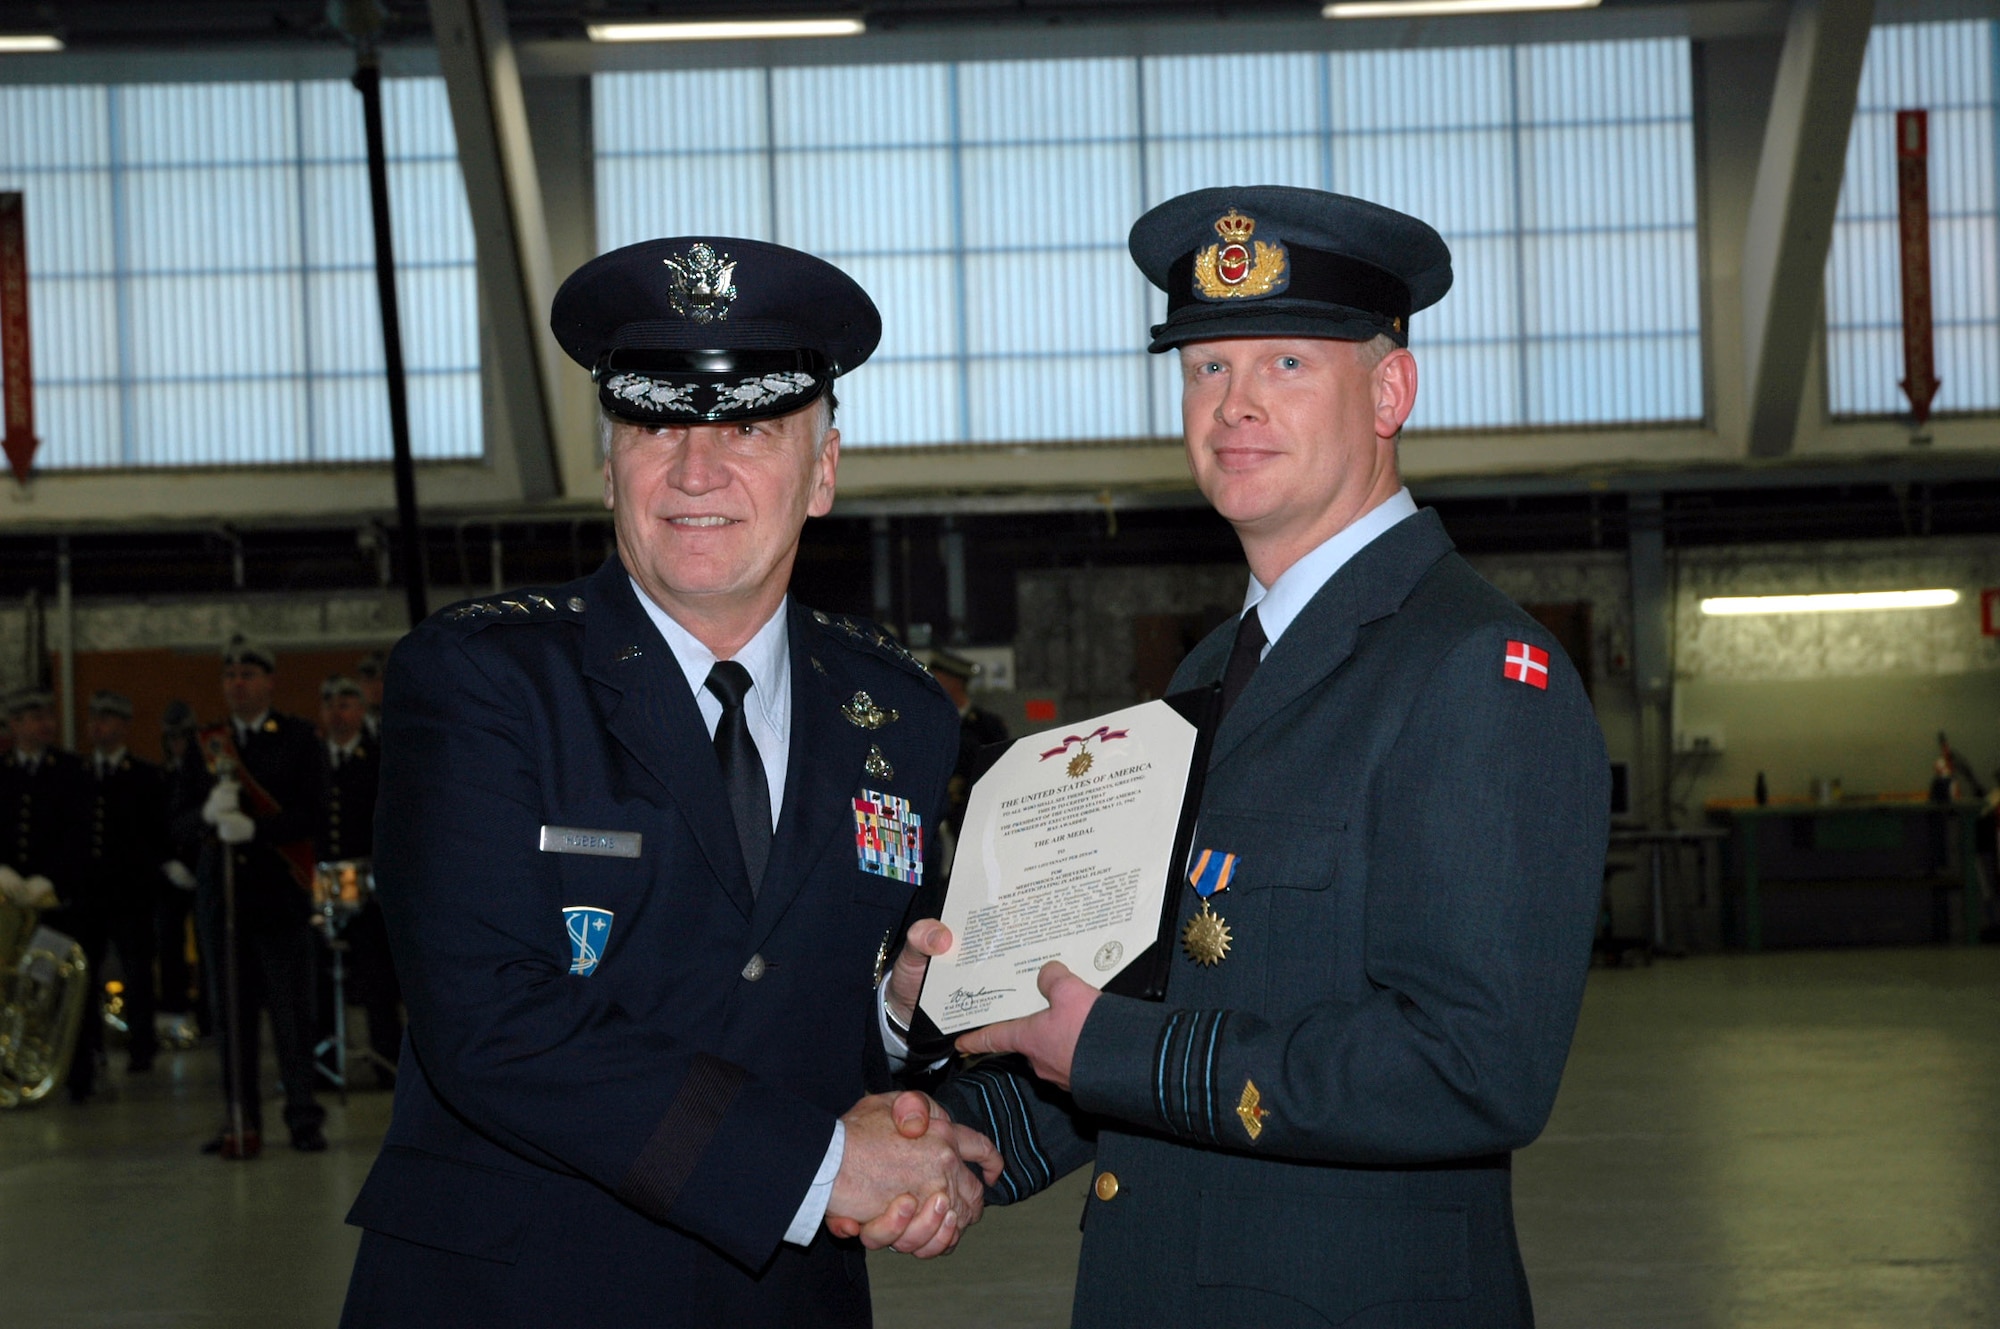 Gen. William T. Hobbins (left) presents a U.S. Air Medal  to Capt. Per Zesach Jan. 2 at Fighter Wing Skrydstrup, Denmark. The general presented 35 Air Medals to Danish fighter pilots recognizing their achievement while operating under the 376th Air Expeditionary Operations Group at Manas Air Base, Kyrgyzstan. General Hobbins is the U.S. Air Forces in Europe commander. Captain Zesach is a Danish F-16 pilot who flew 27 combat missions in support of Operation Enduring Freedom from October 2002 to October 2003. (U.S. Air Force photo/Maj. Krista Carlos) 
